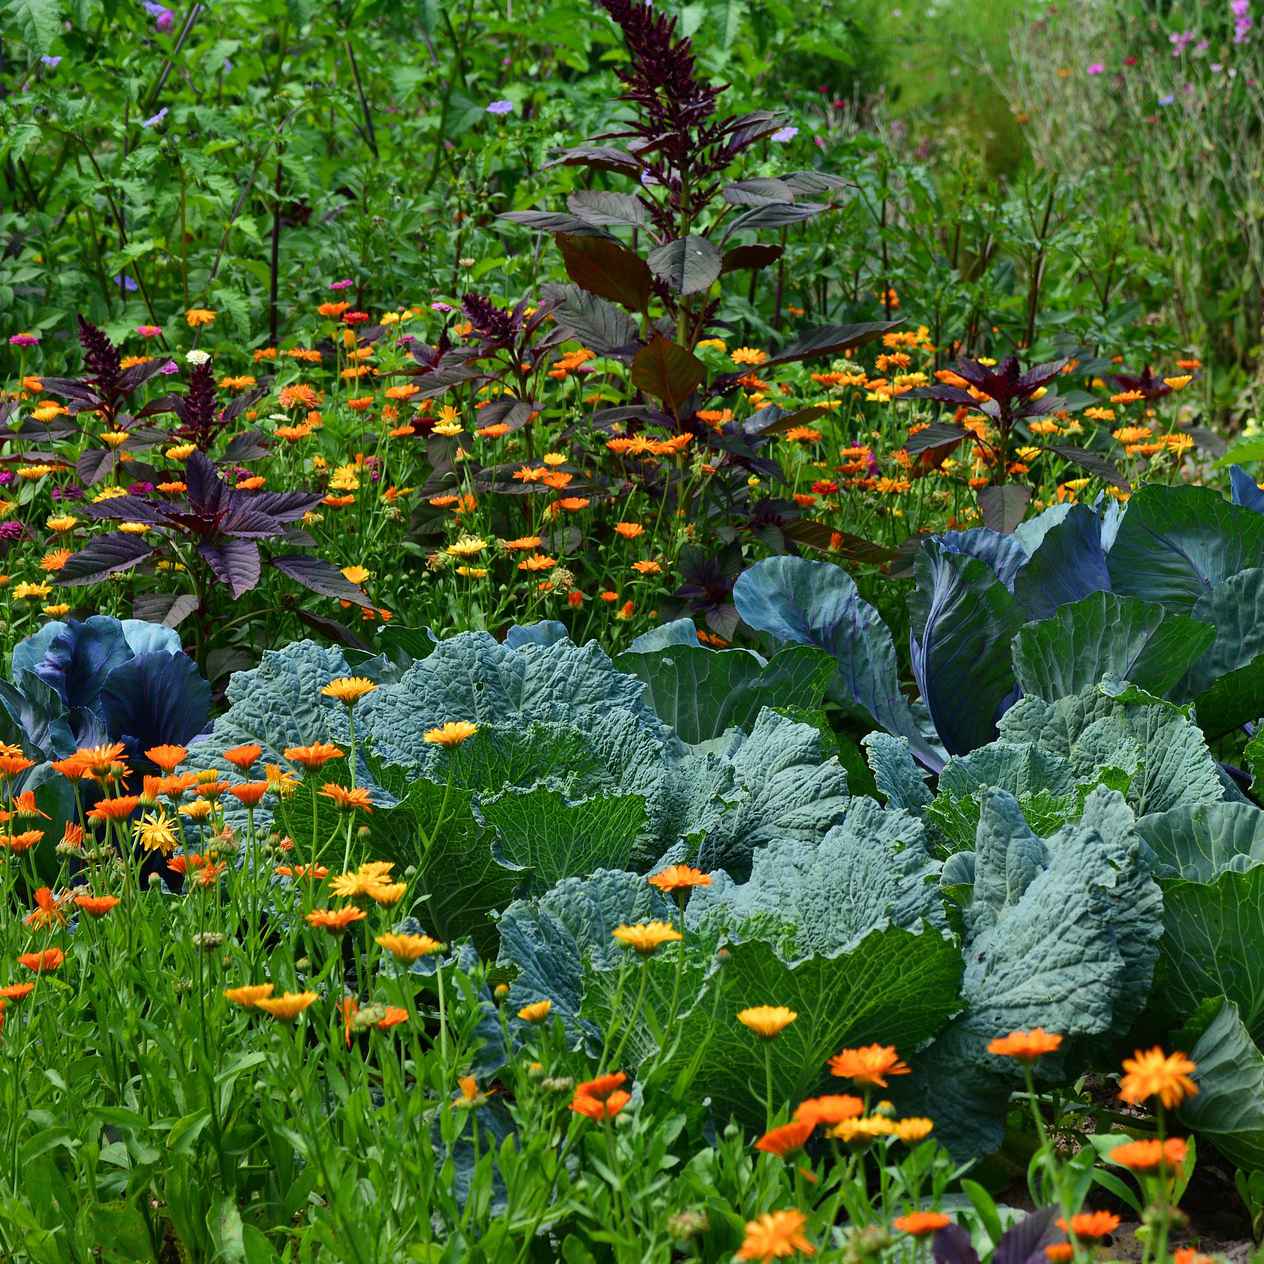 How to Grow a Vegetable Garden that is both Beautiful and Practical